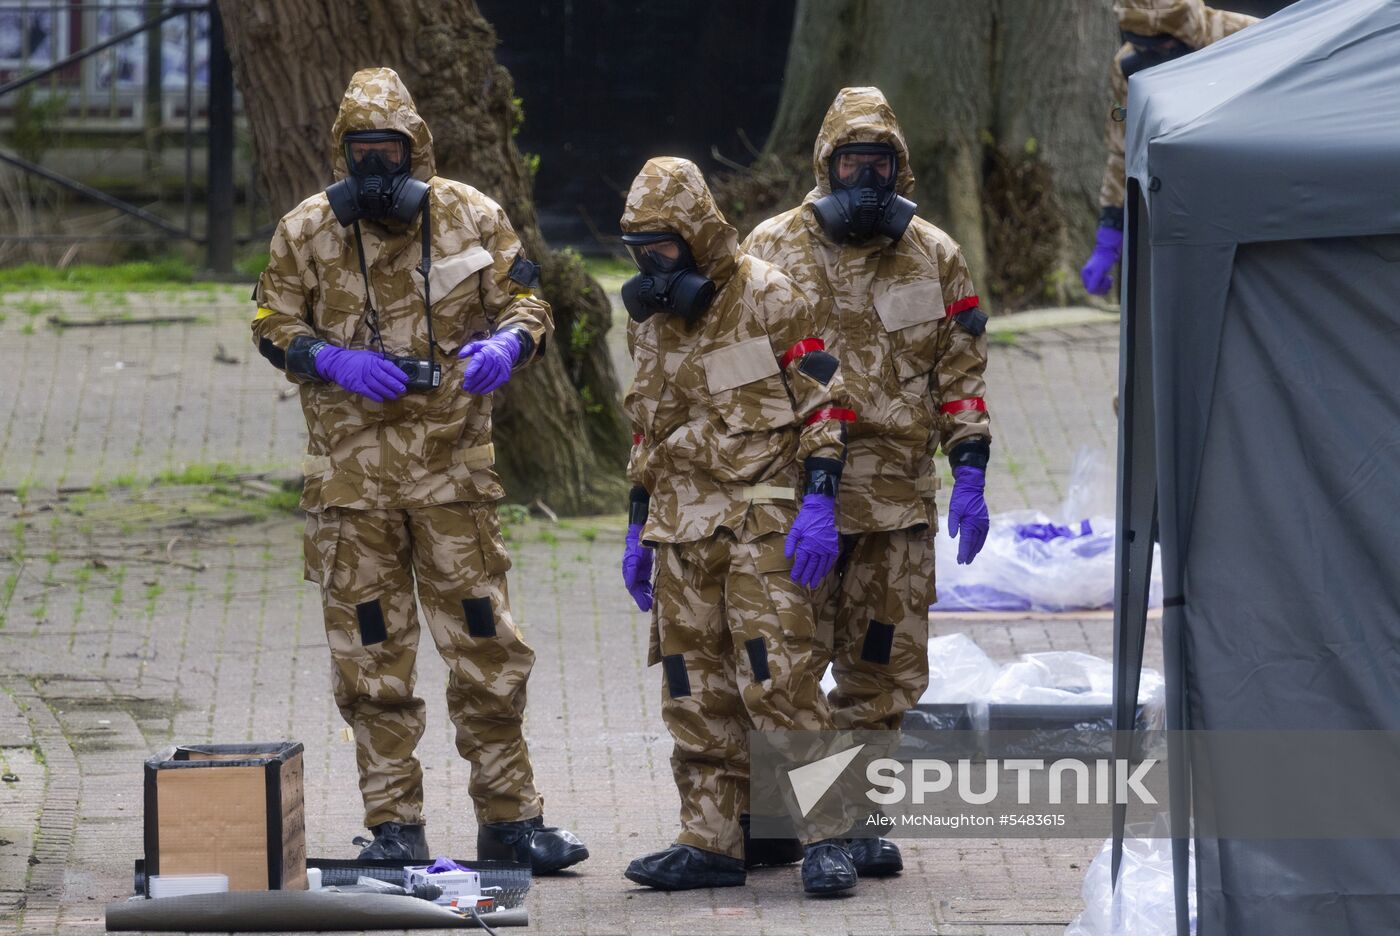 Salisbury begins cleaning spots related to Skripal poisoning